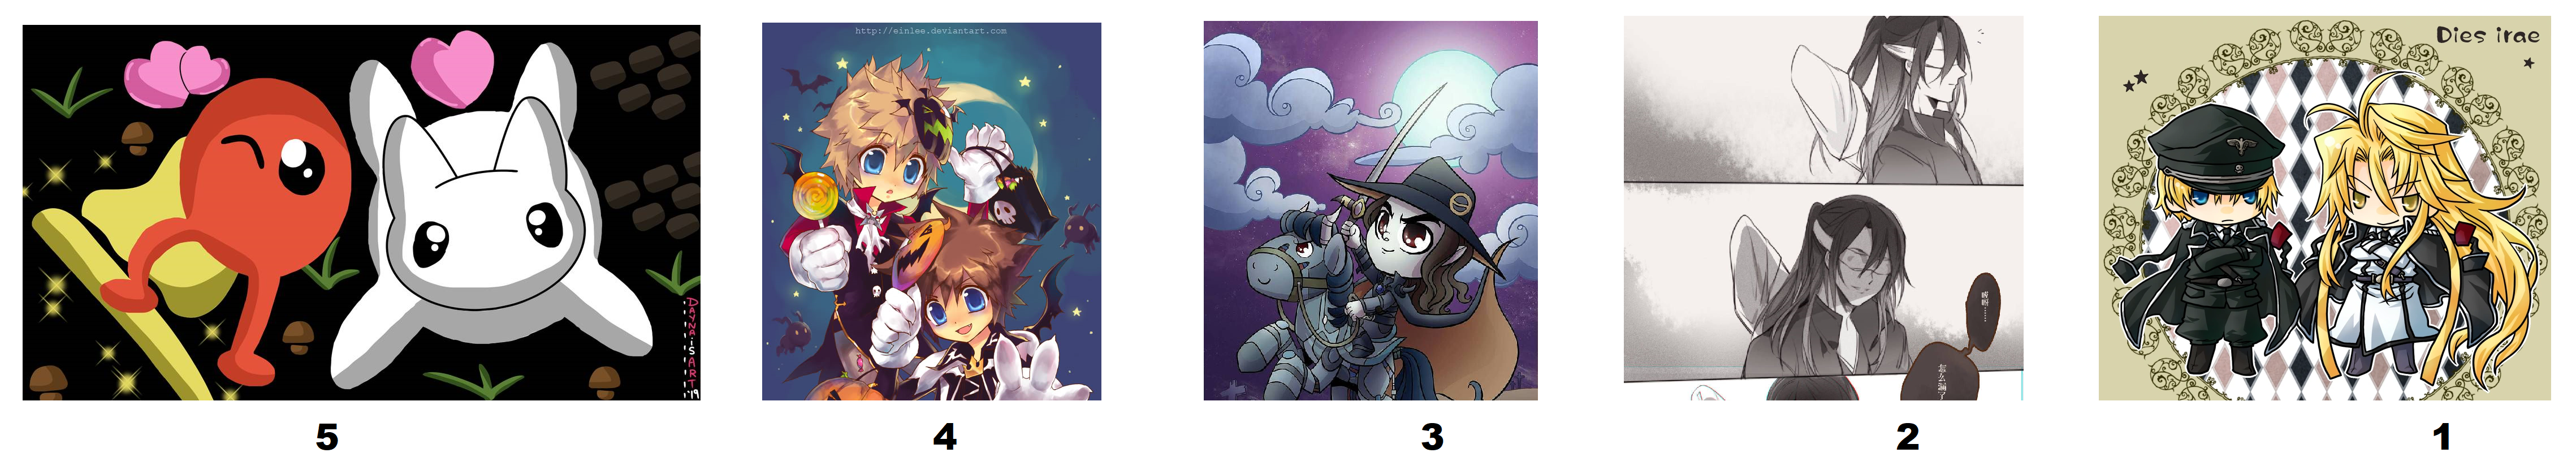 Top 5 3-As chibified